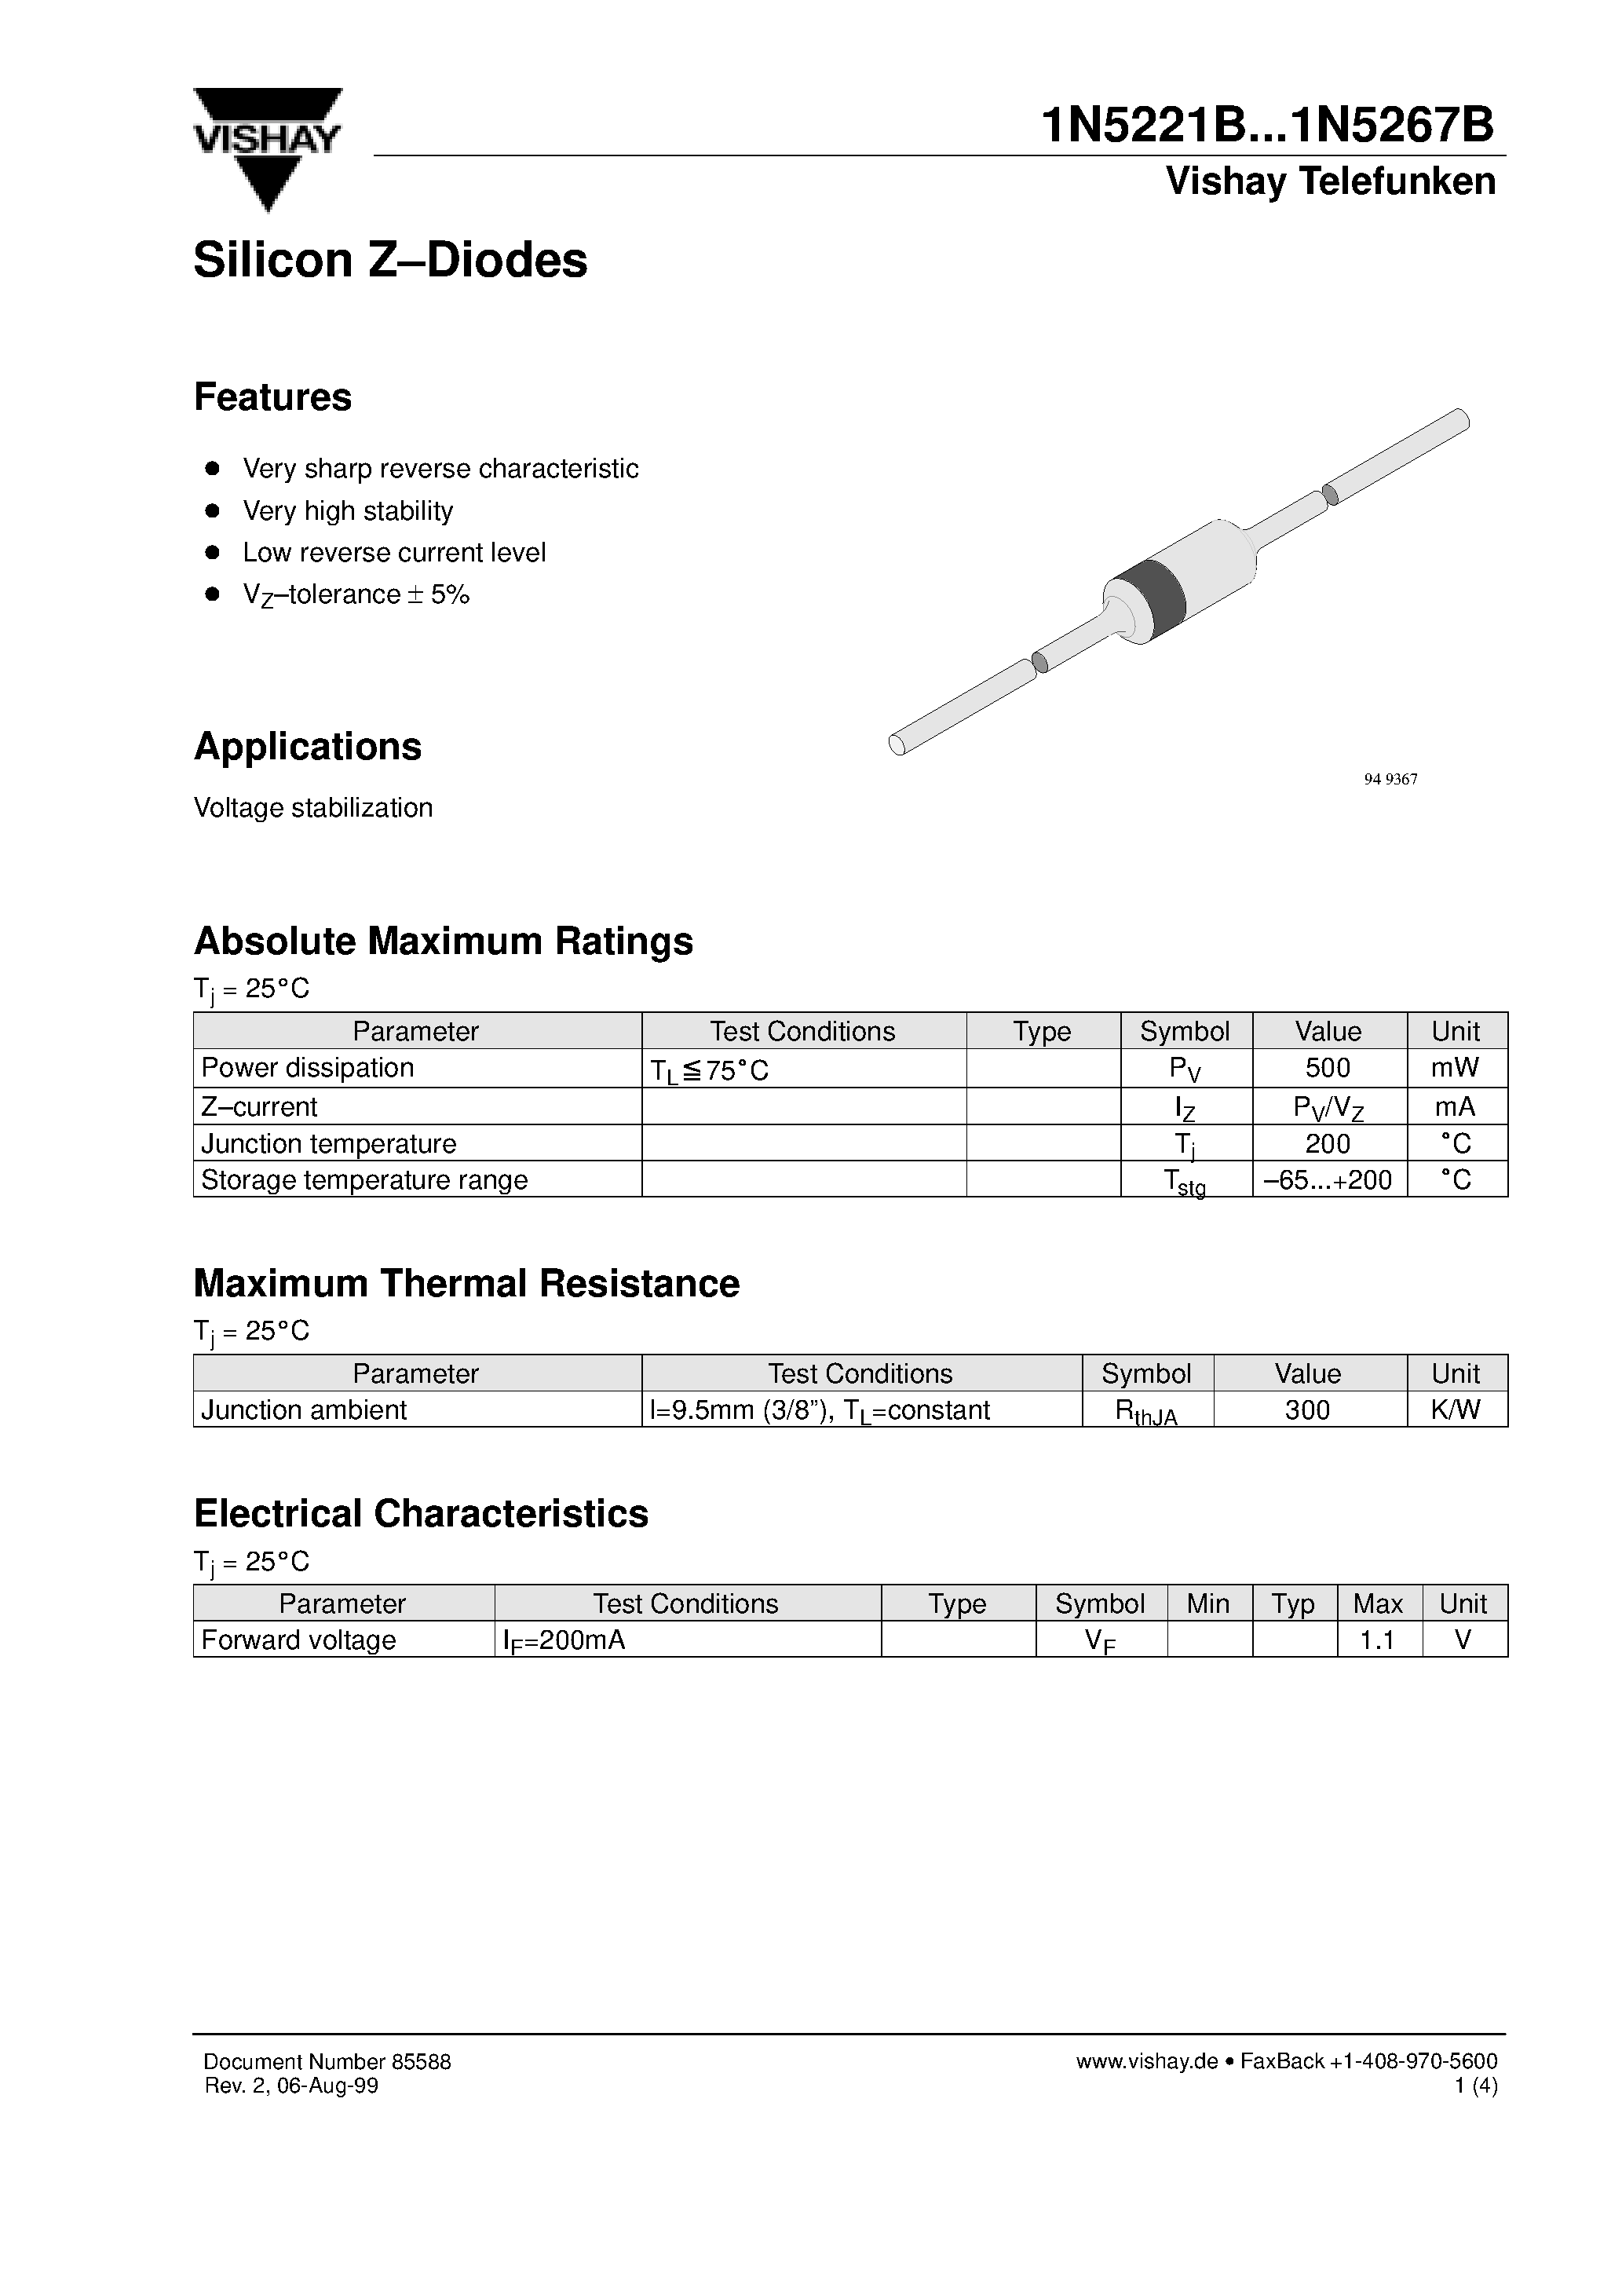 Datasheet 1N5246B - Silicon Z-Diodes page 1